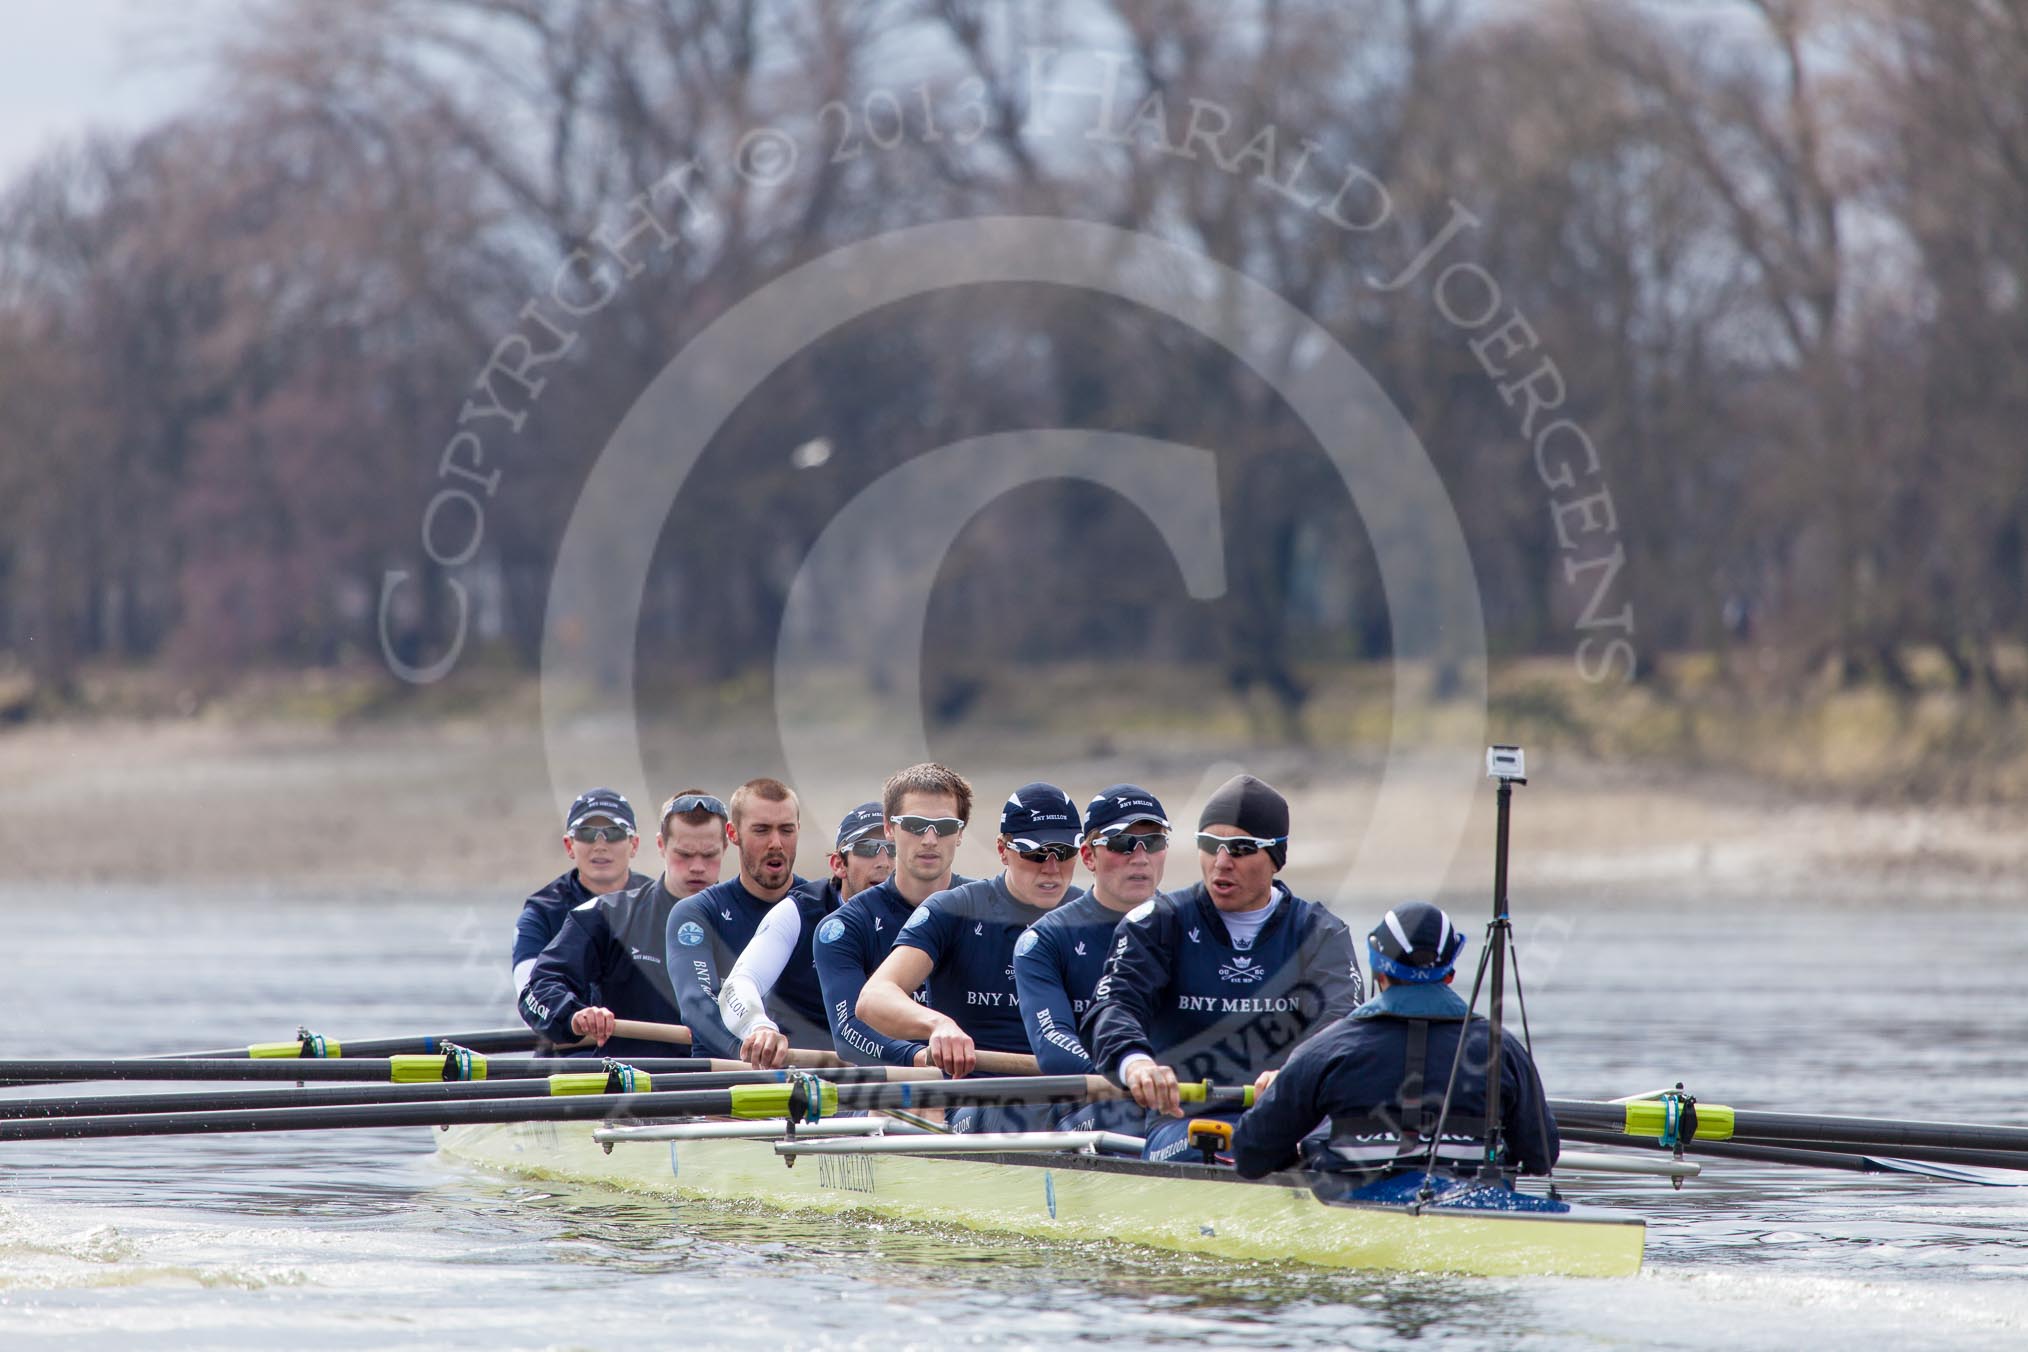 The Boat Race season 2013 -  Tideway Week (Friday) and press conferences.
River Thames,
London SW15,

United Kingdom,
on 29 March 2013 at 11:21, image #99